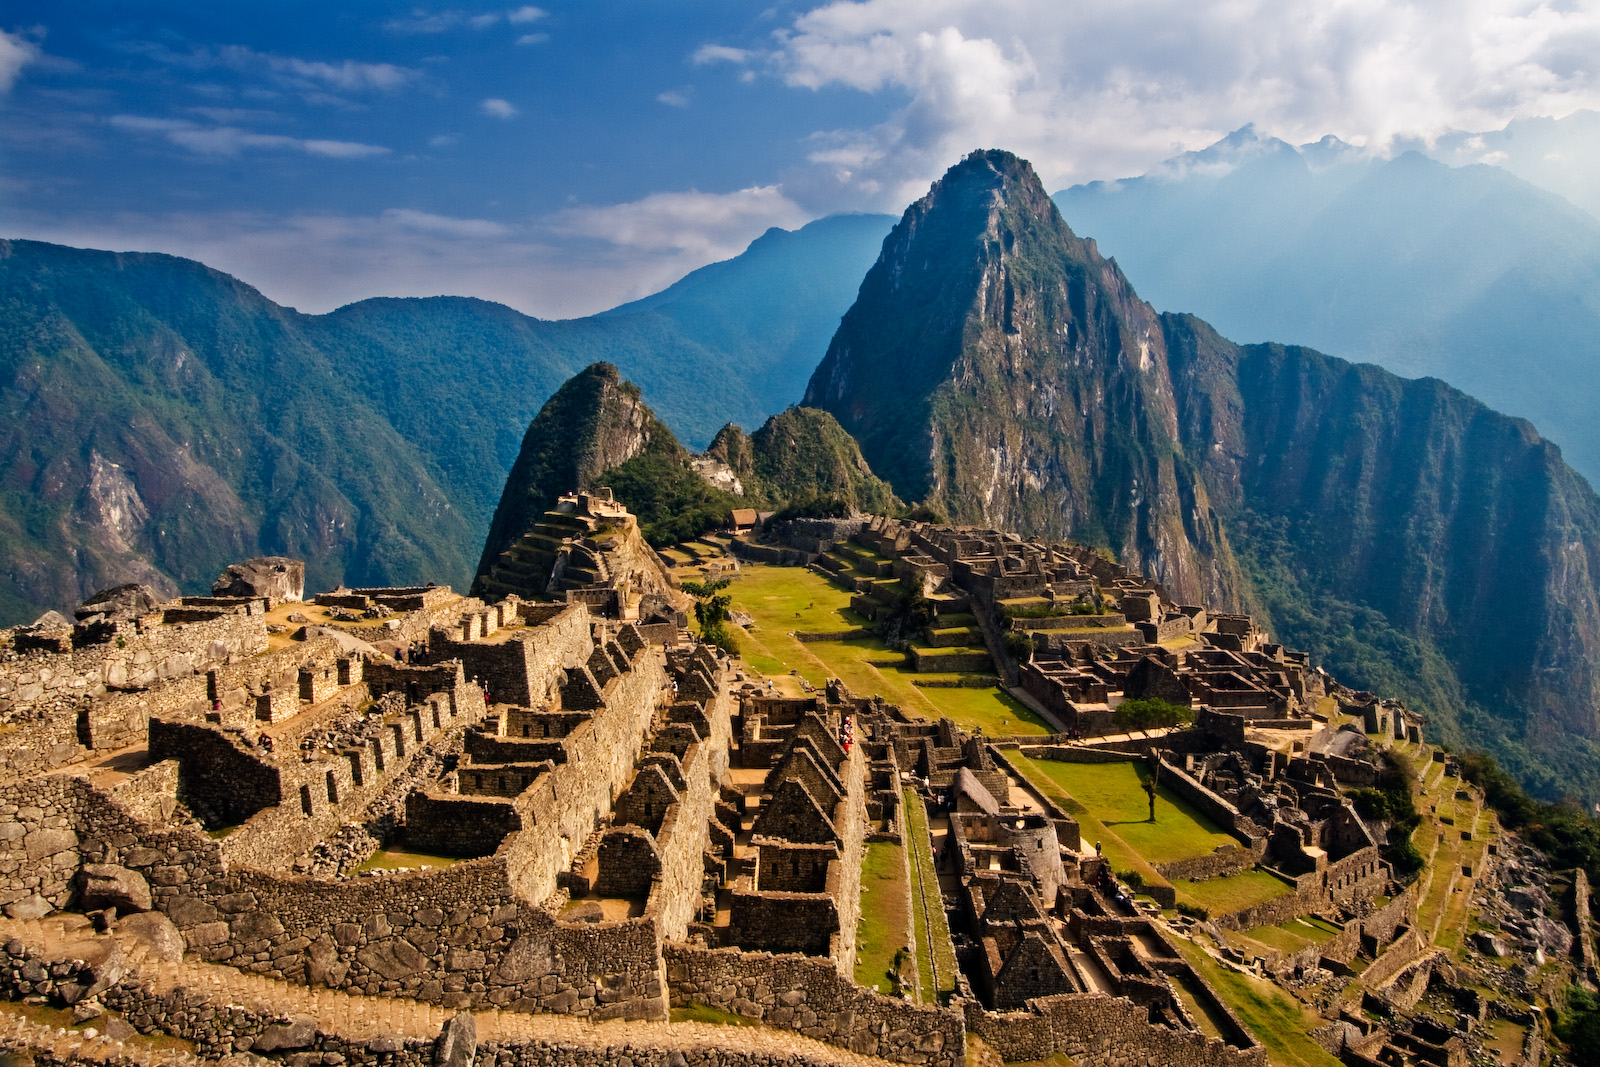 Machu Picchu: 6 DESTINATIONS TO EXPLORE THIS NEW YEAR